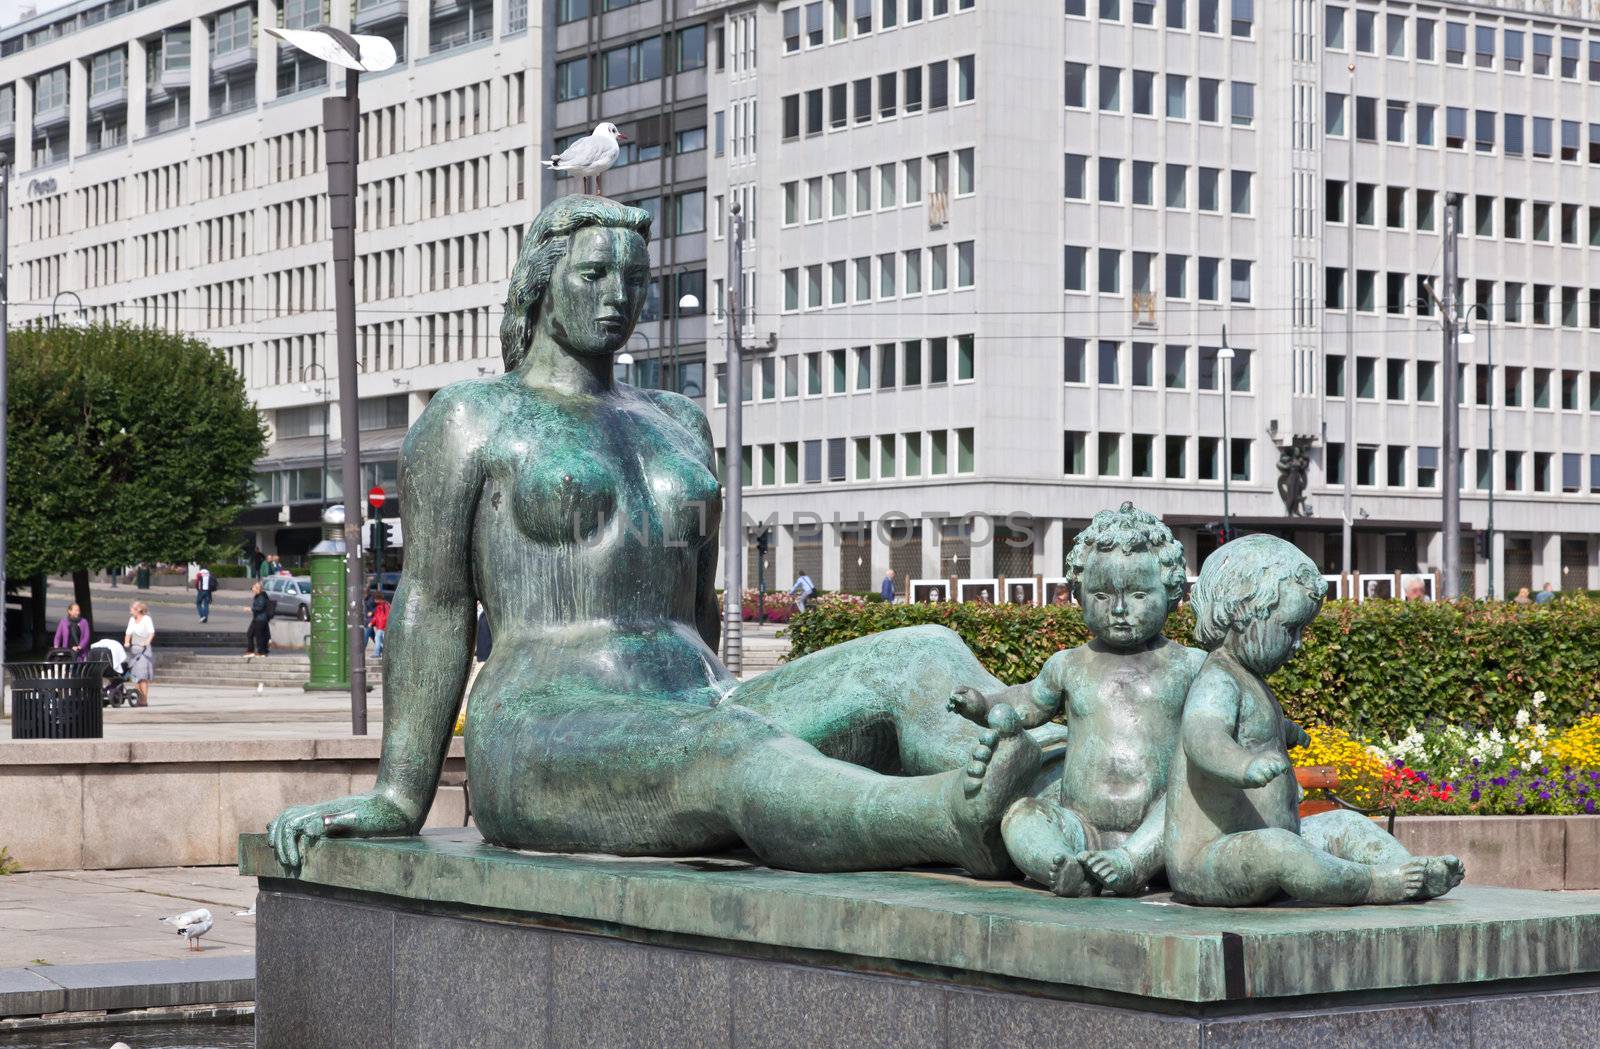 The sculpturre in front of Oslo City Hall in central Oslo Norway